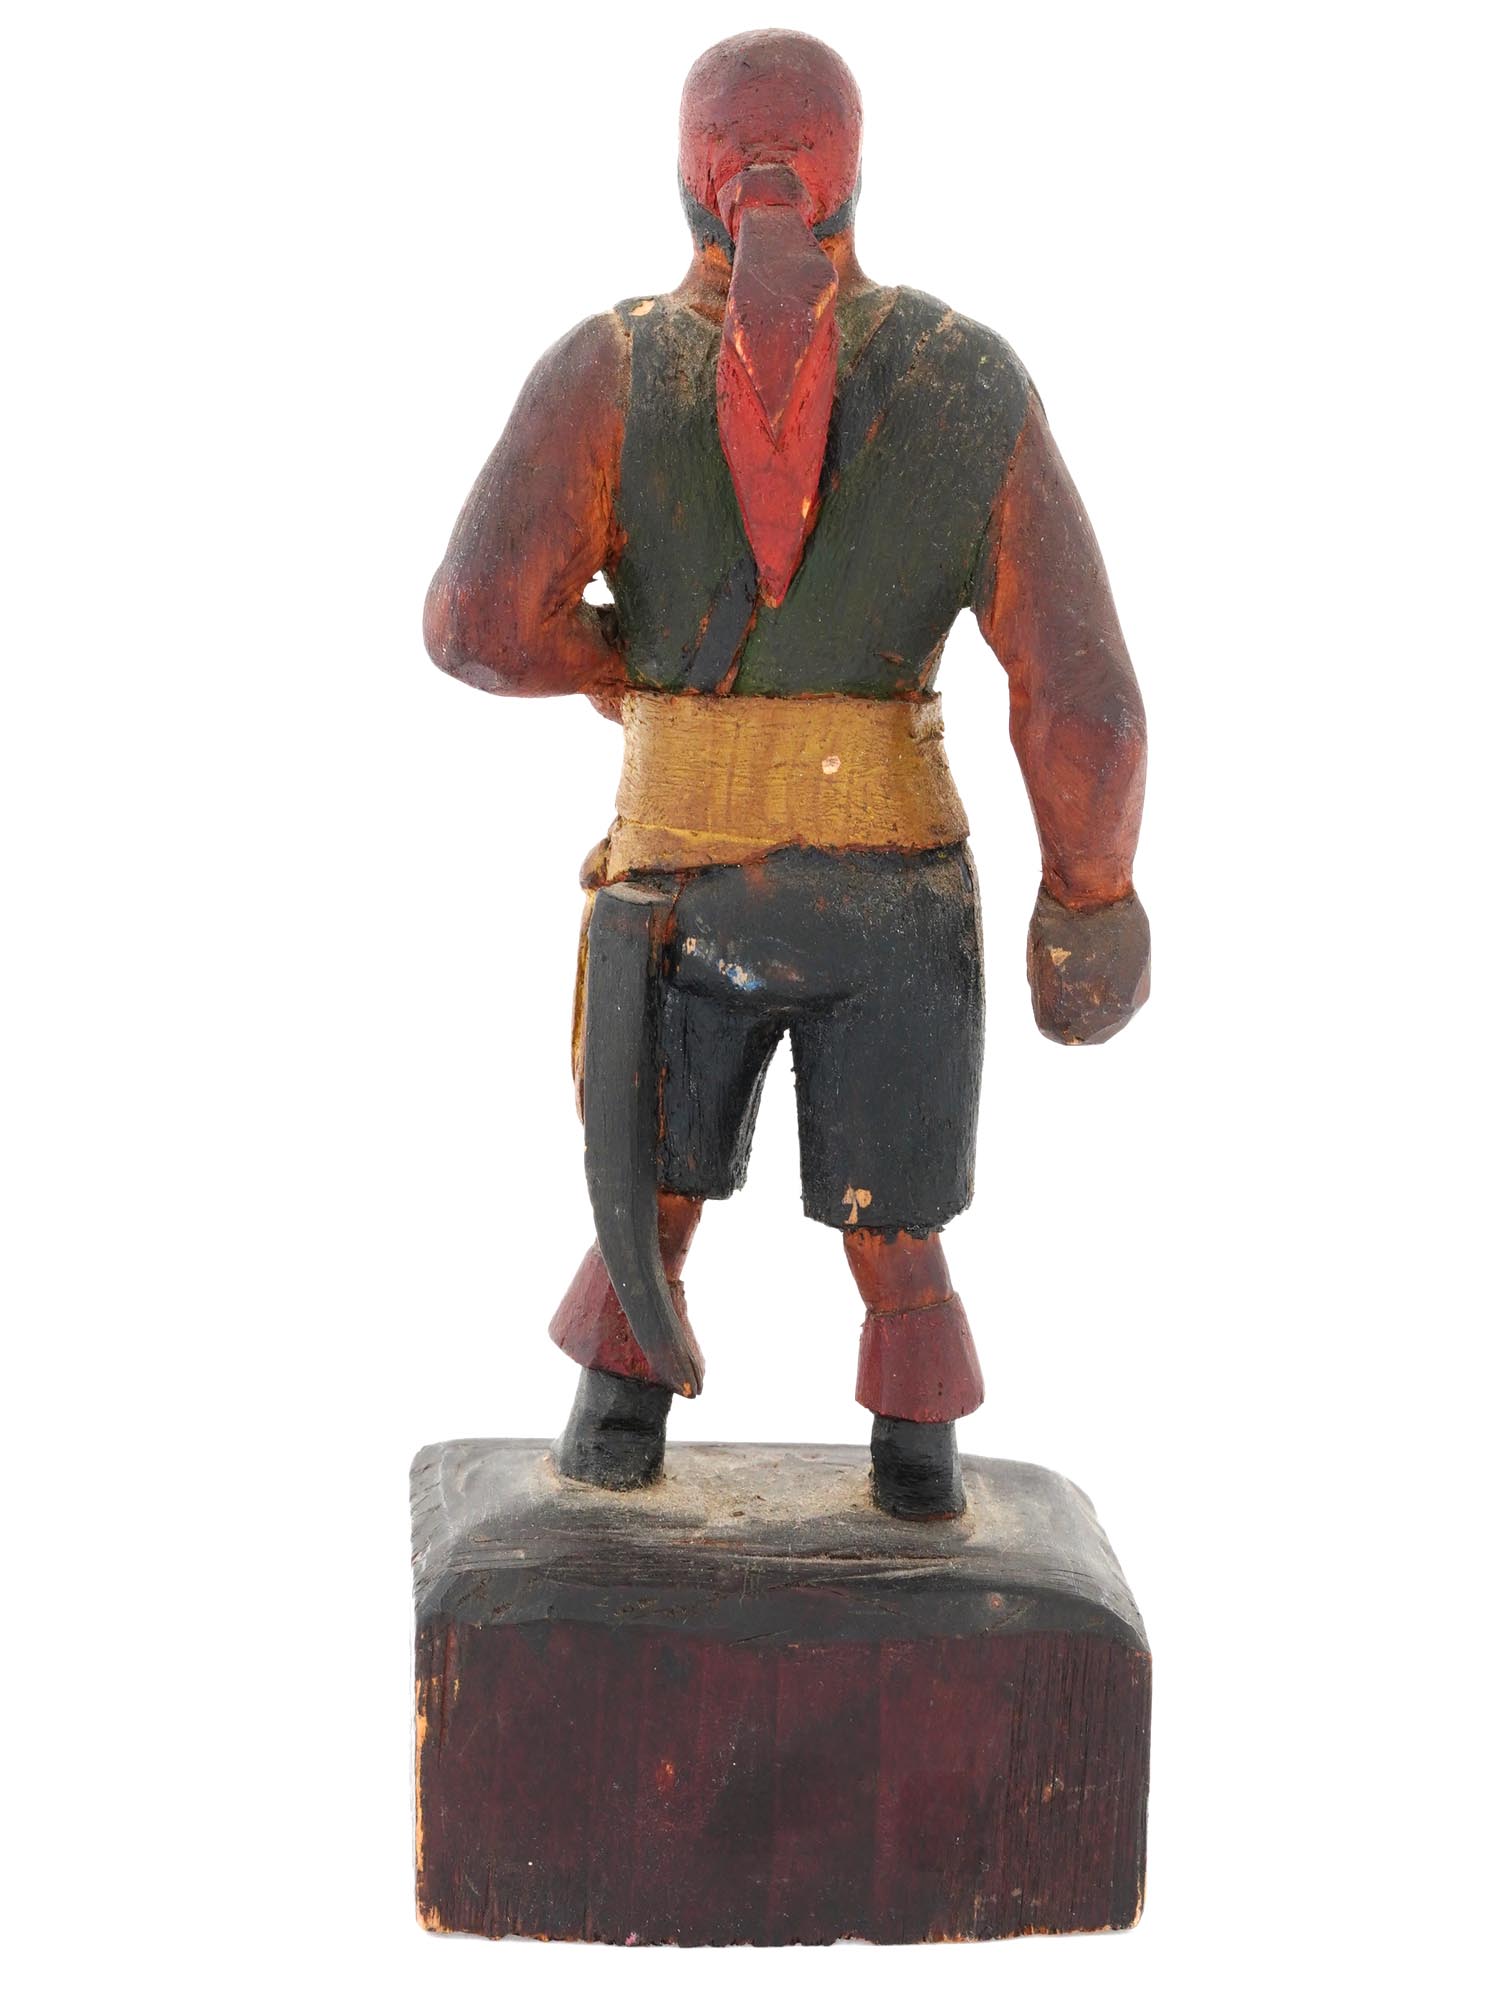 AMERICAN FOLK ART HAND CARVED WOOD FIGURE OF PIRATE PIC-2